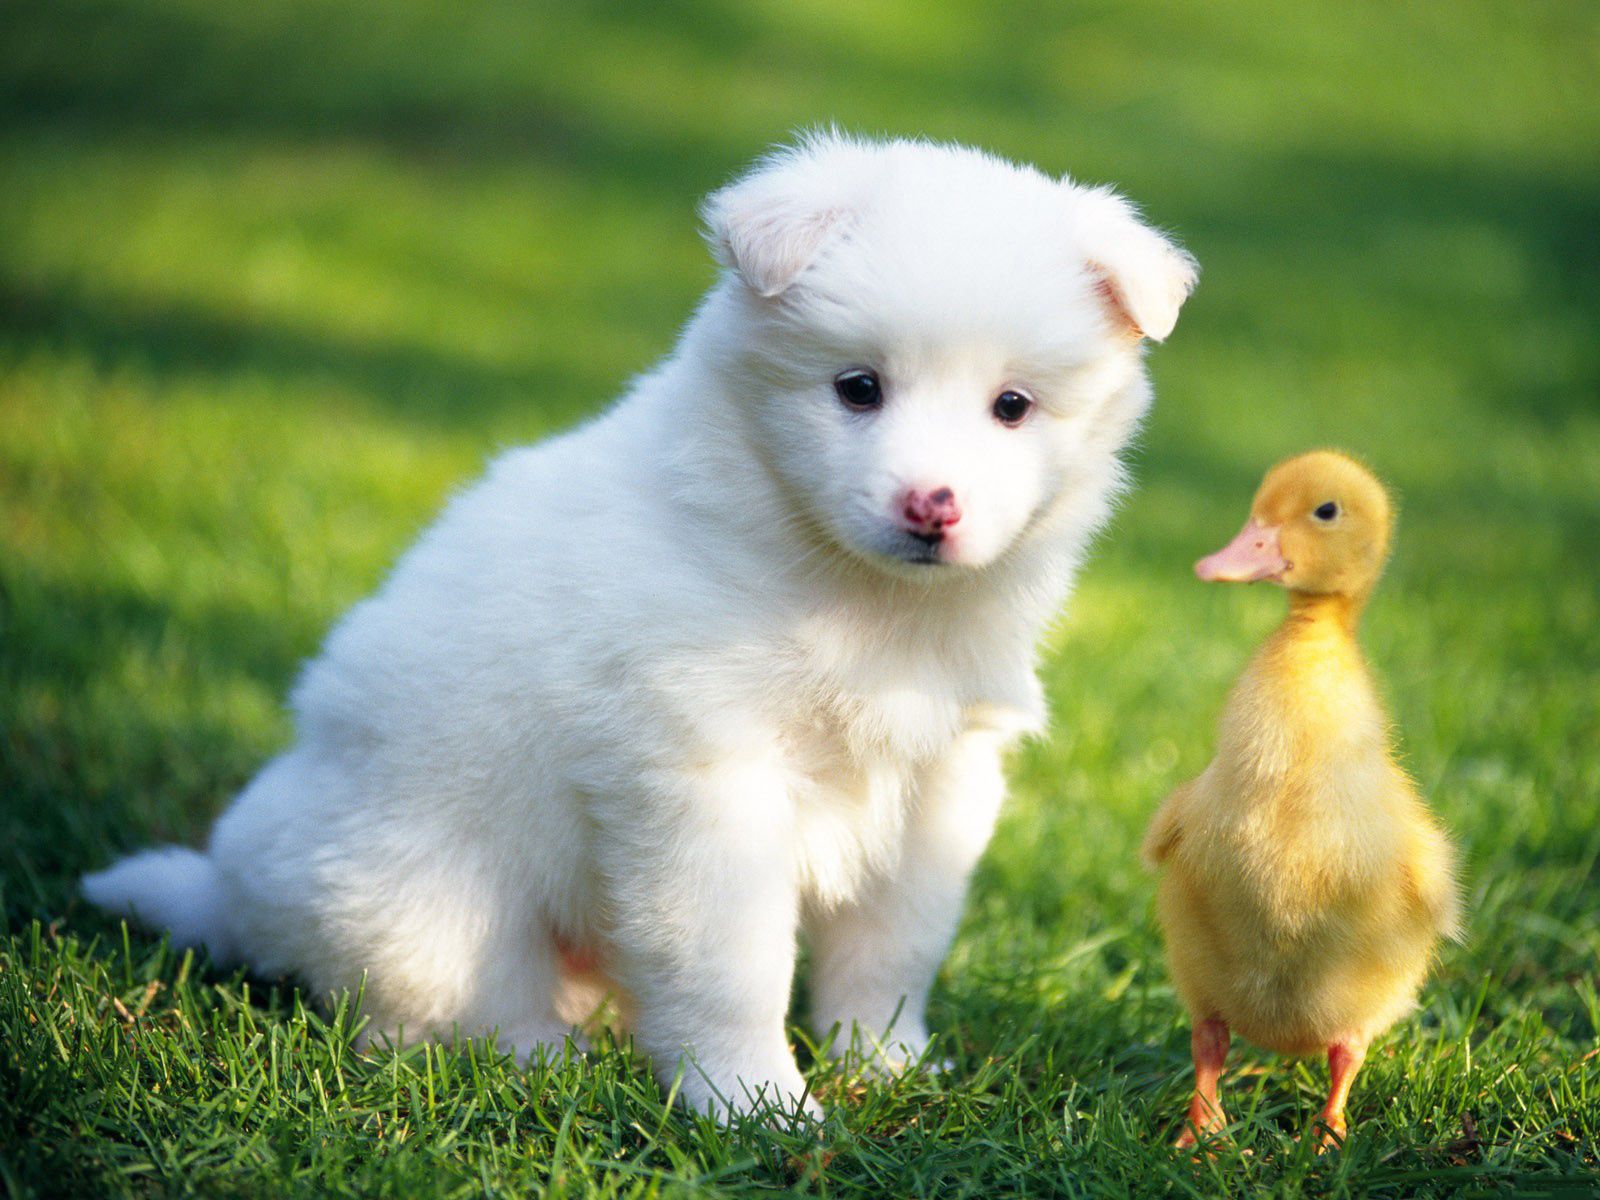 Beautiful Puppy And Duck Wallpaper - Baby Duck And Puppy , HD Wallpaper & Backgrounds